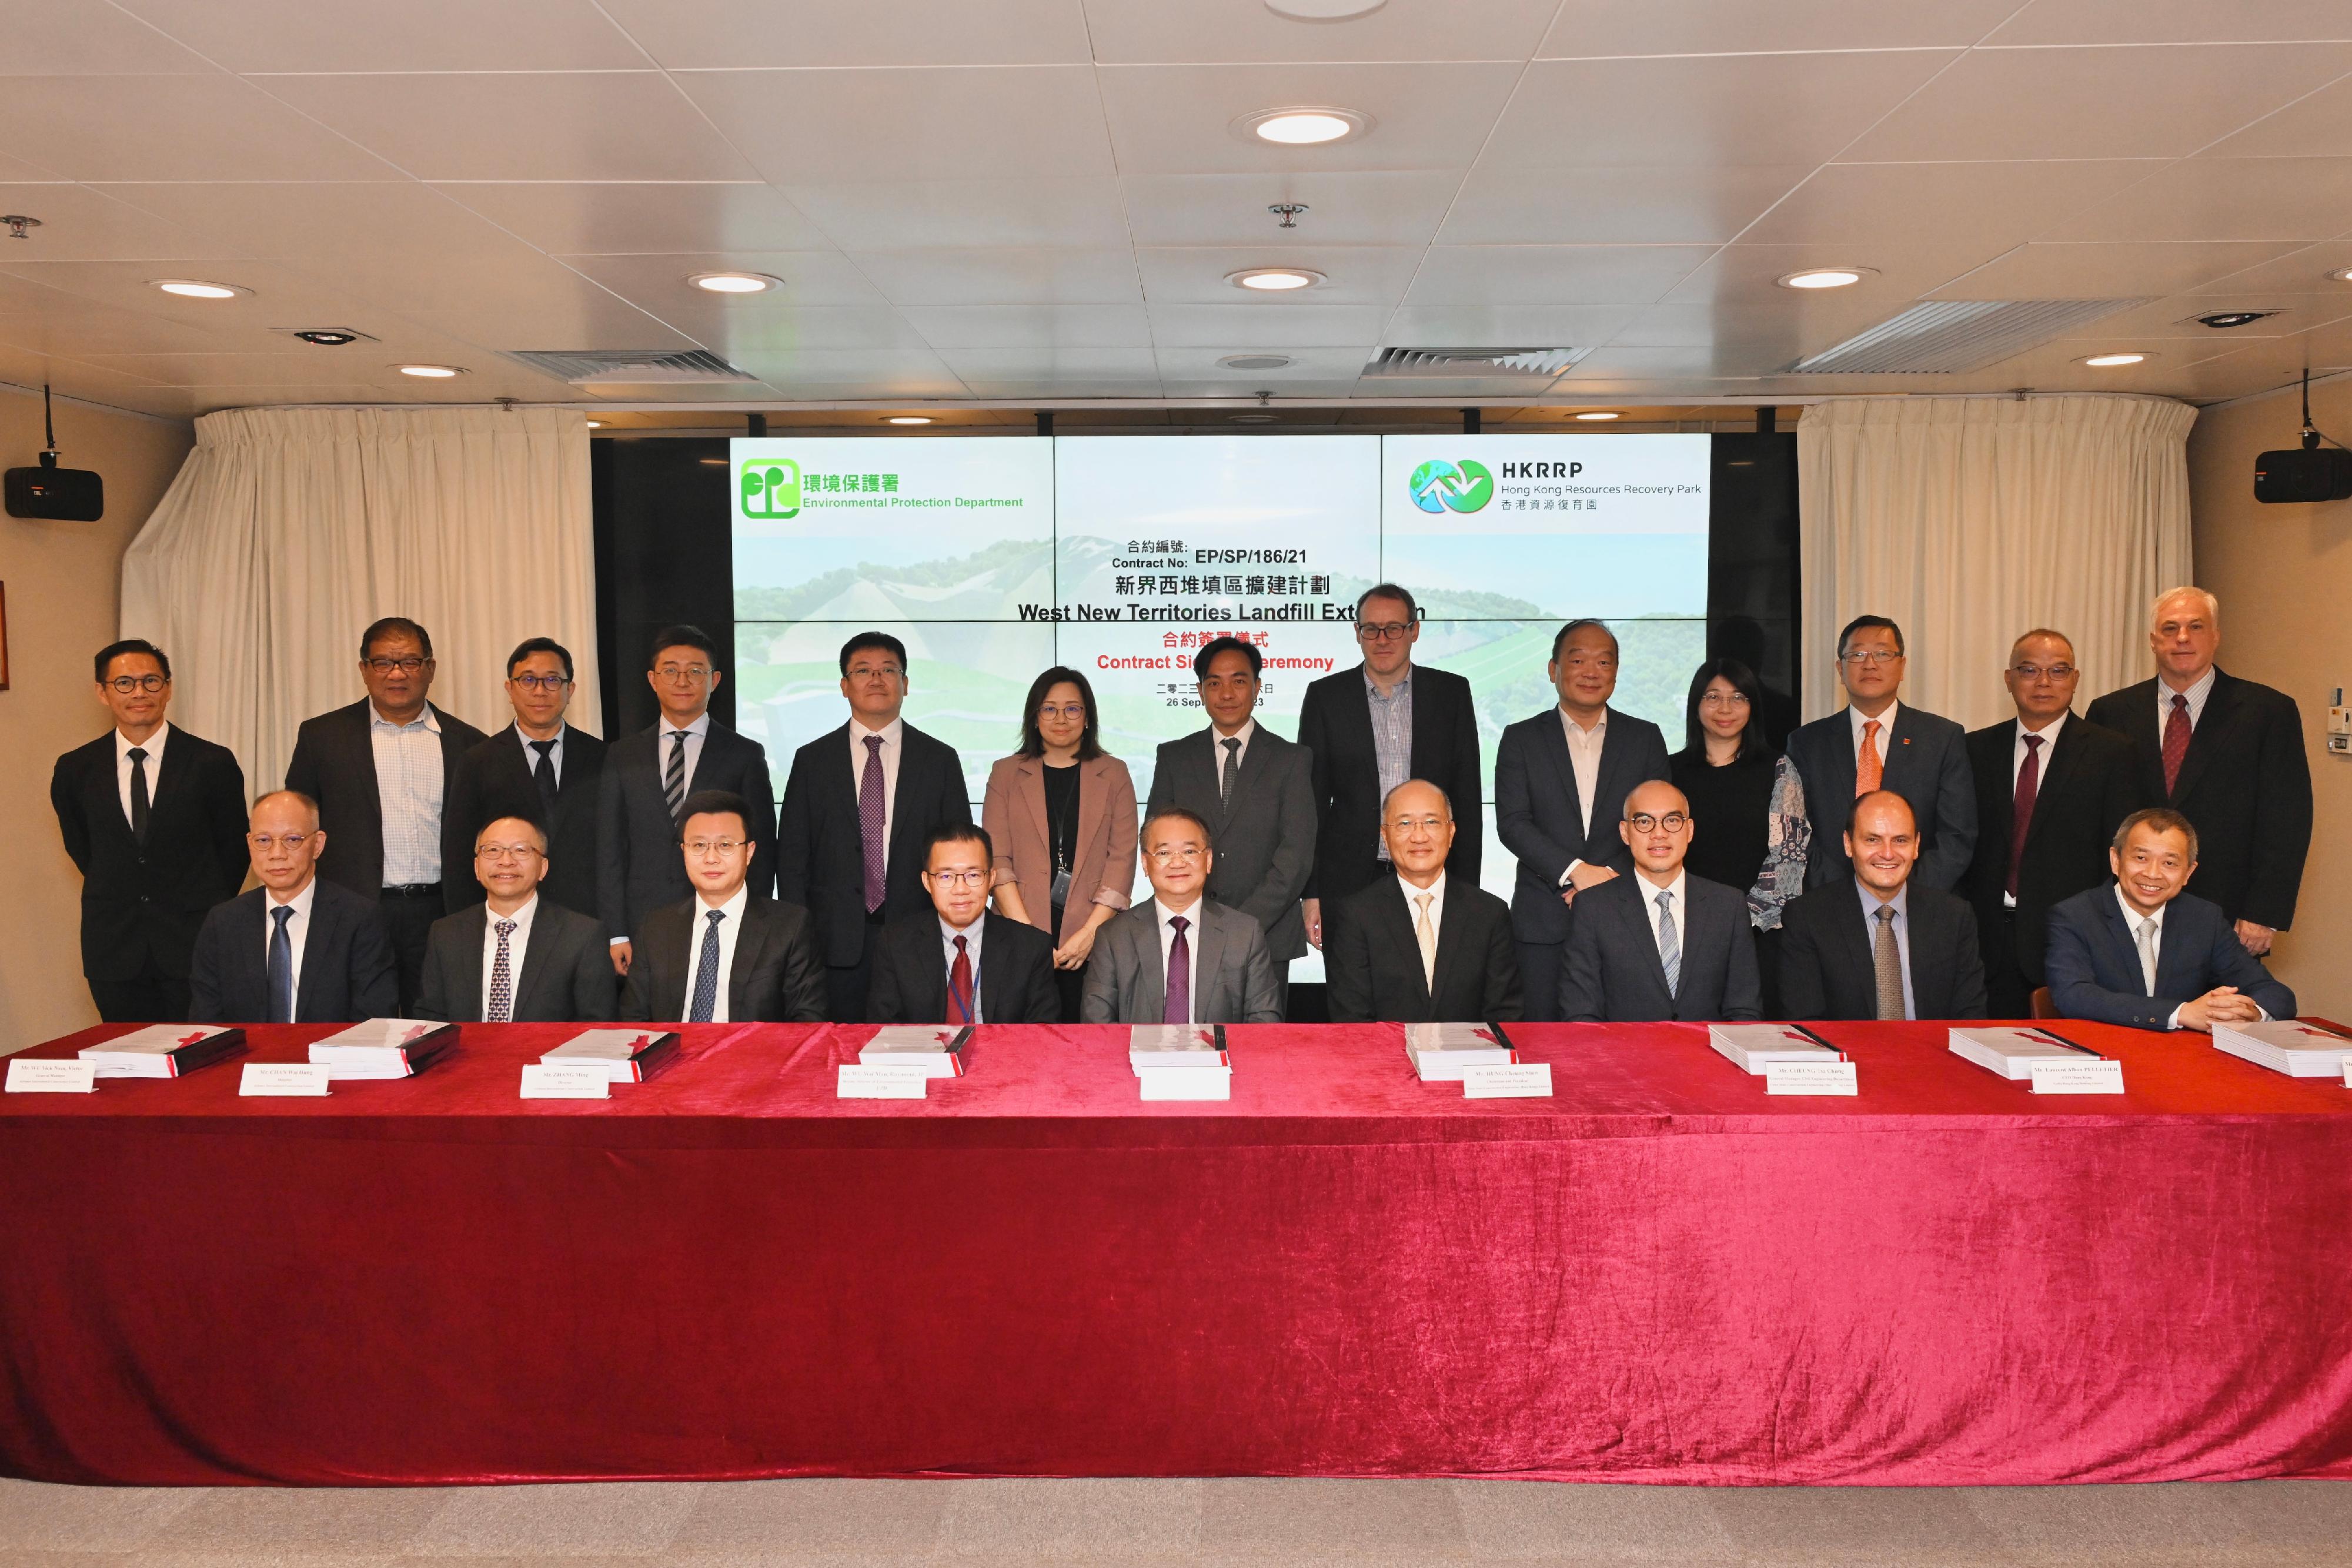 The Environmental Protection Department signed the contract for West New Territories Landfill Extension project with Hong Kong Resources Recovery Park (joint venture) today (September 26). Photo shows the Director of Environmental Protection, Dr Samuel Chui (front row, centre), Deputy Director of Environmental Protection Mr Raymond Wu (front row, fourth left) and the representatives of the Environmental Protection Department, Hong Kong Resources Recovery Park (joint venture) and Ove Arup & Partners Hong Kong Limited attending the contract signing ceremony.